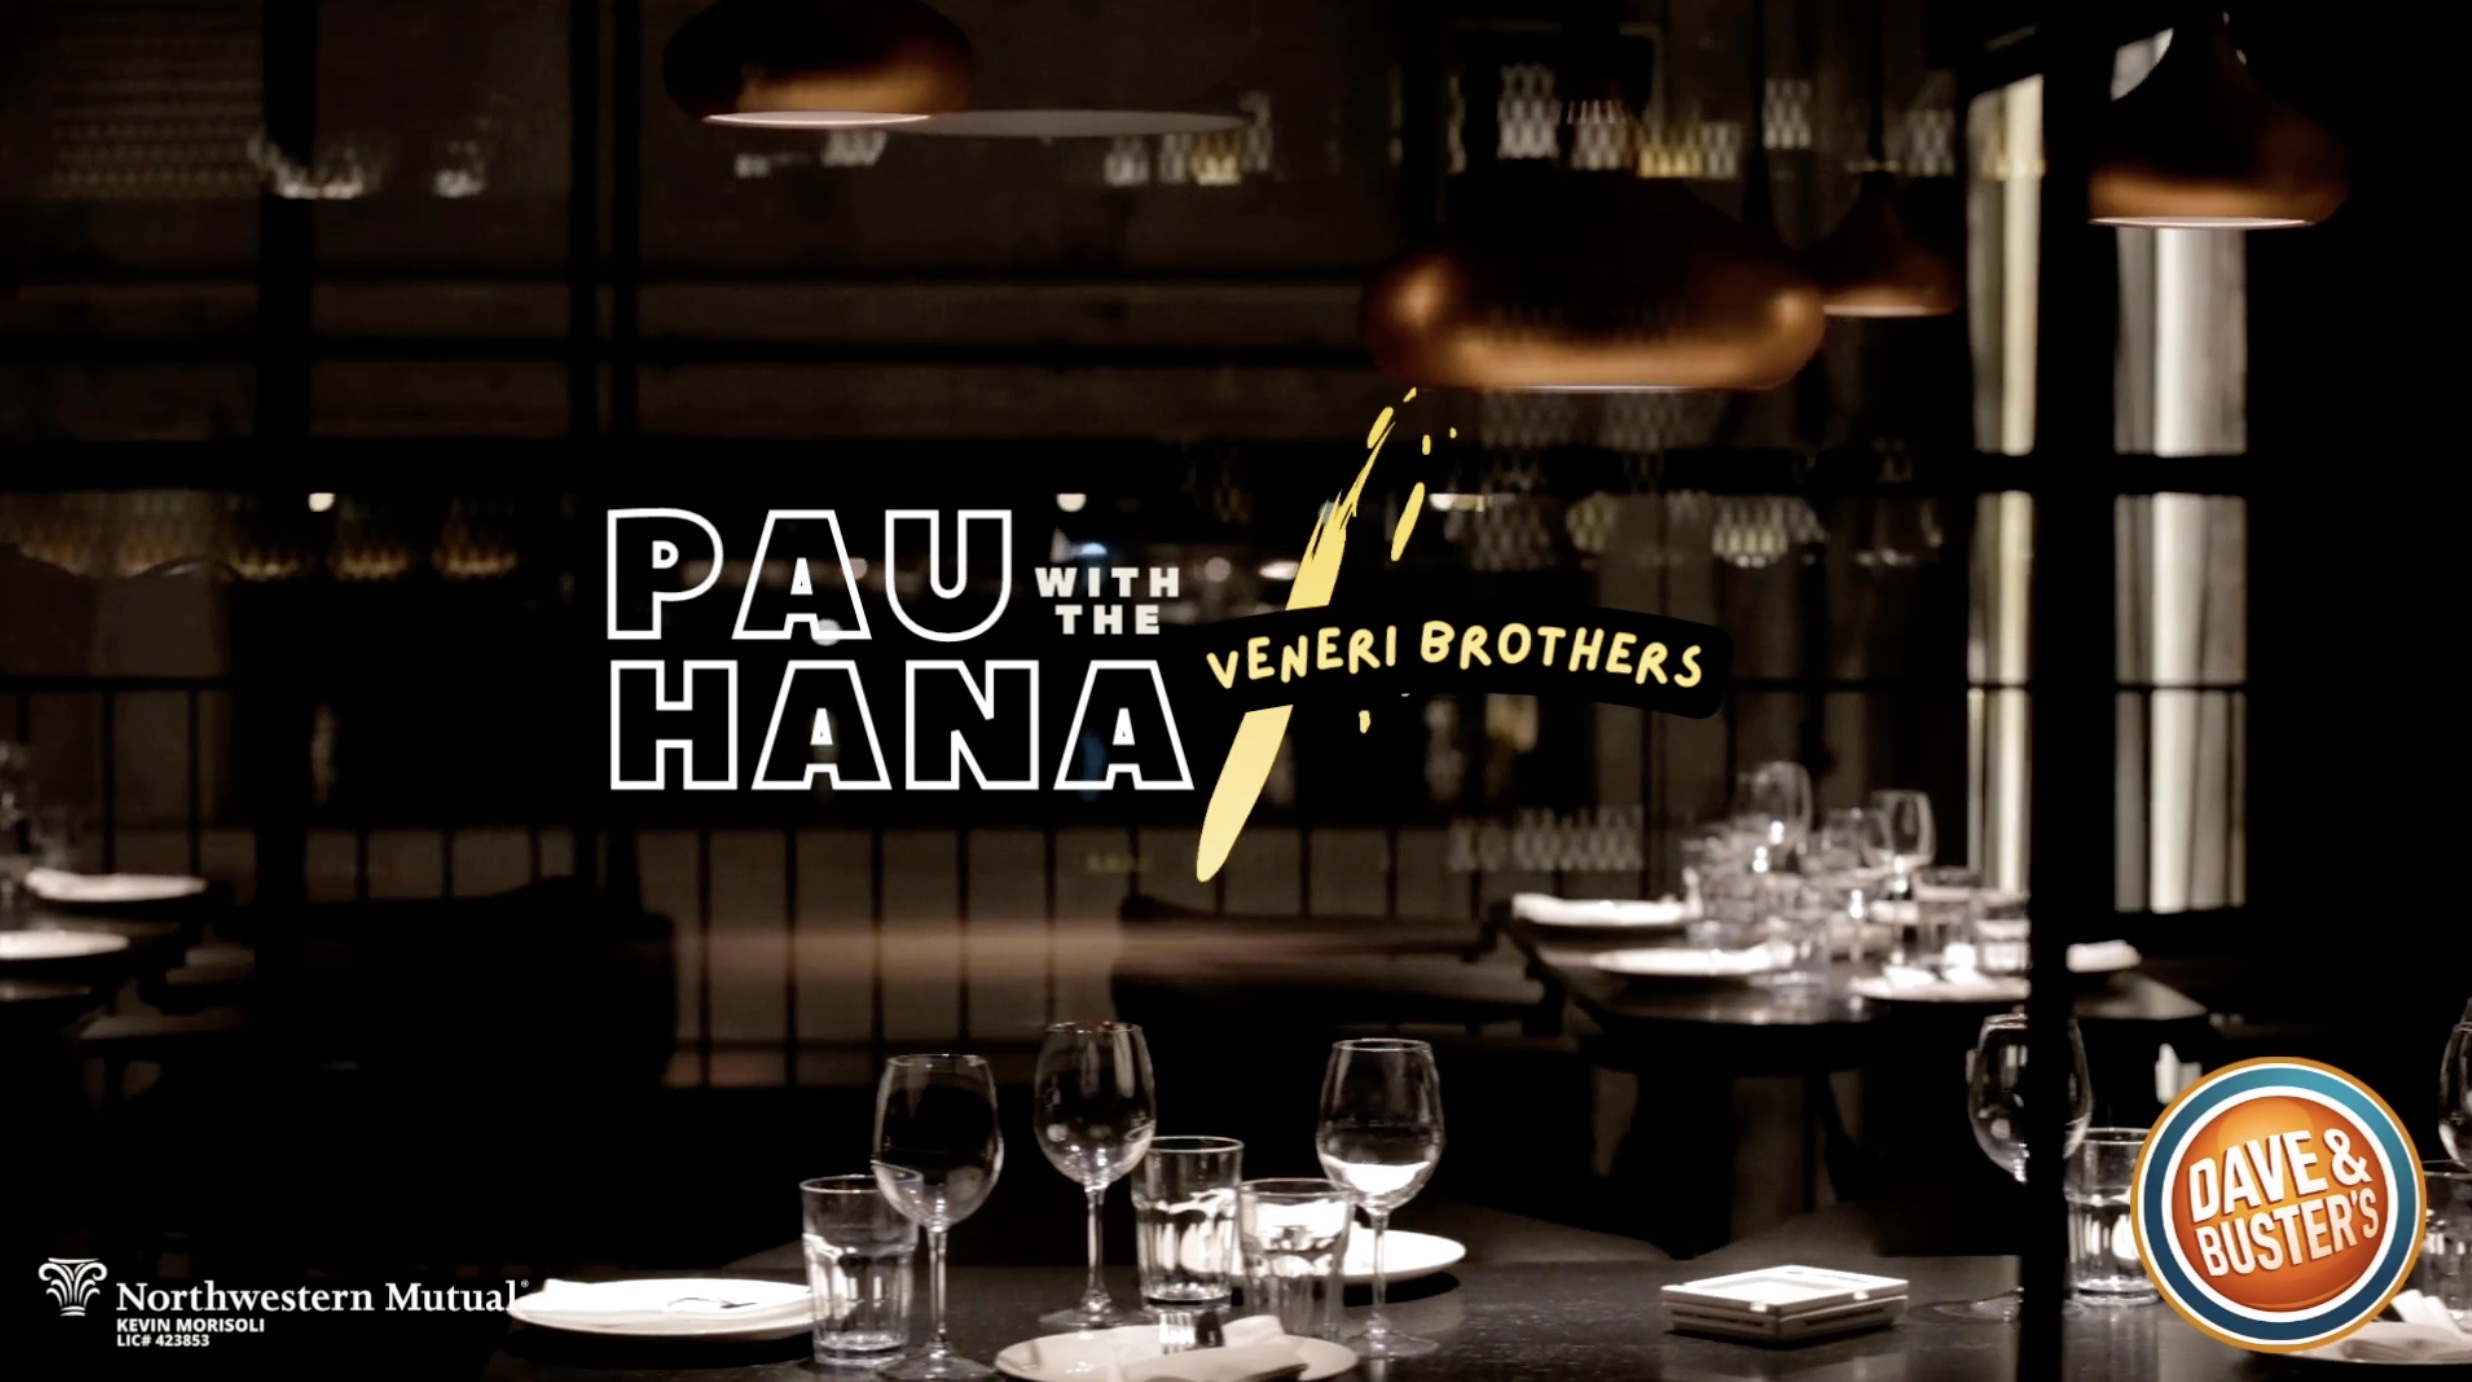 Pau Hana With The Veneri Brothers at Dave & Busters